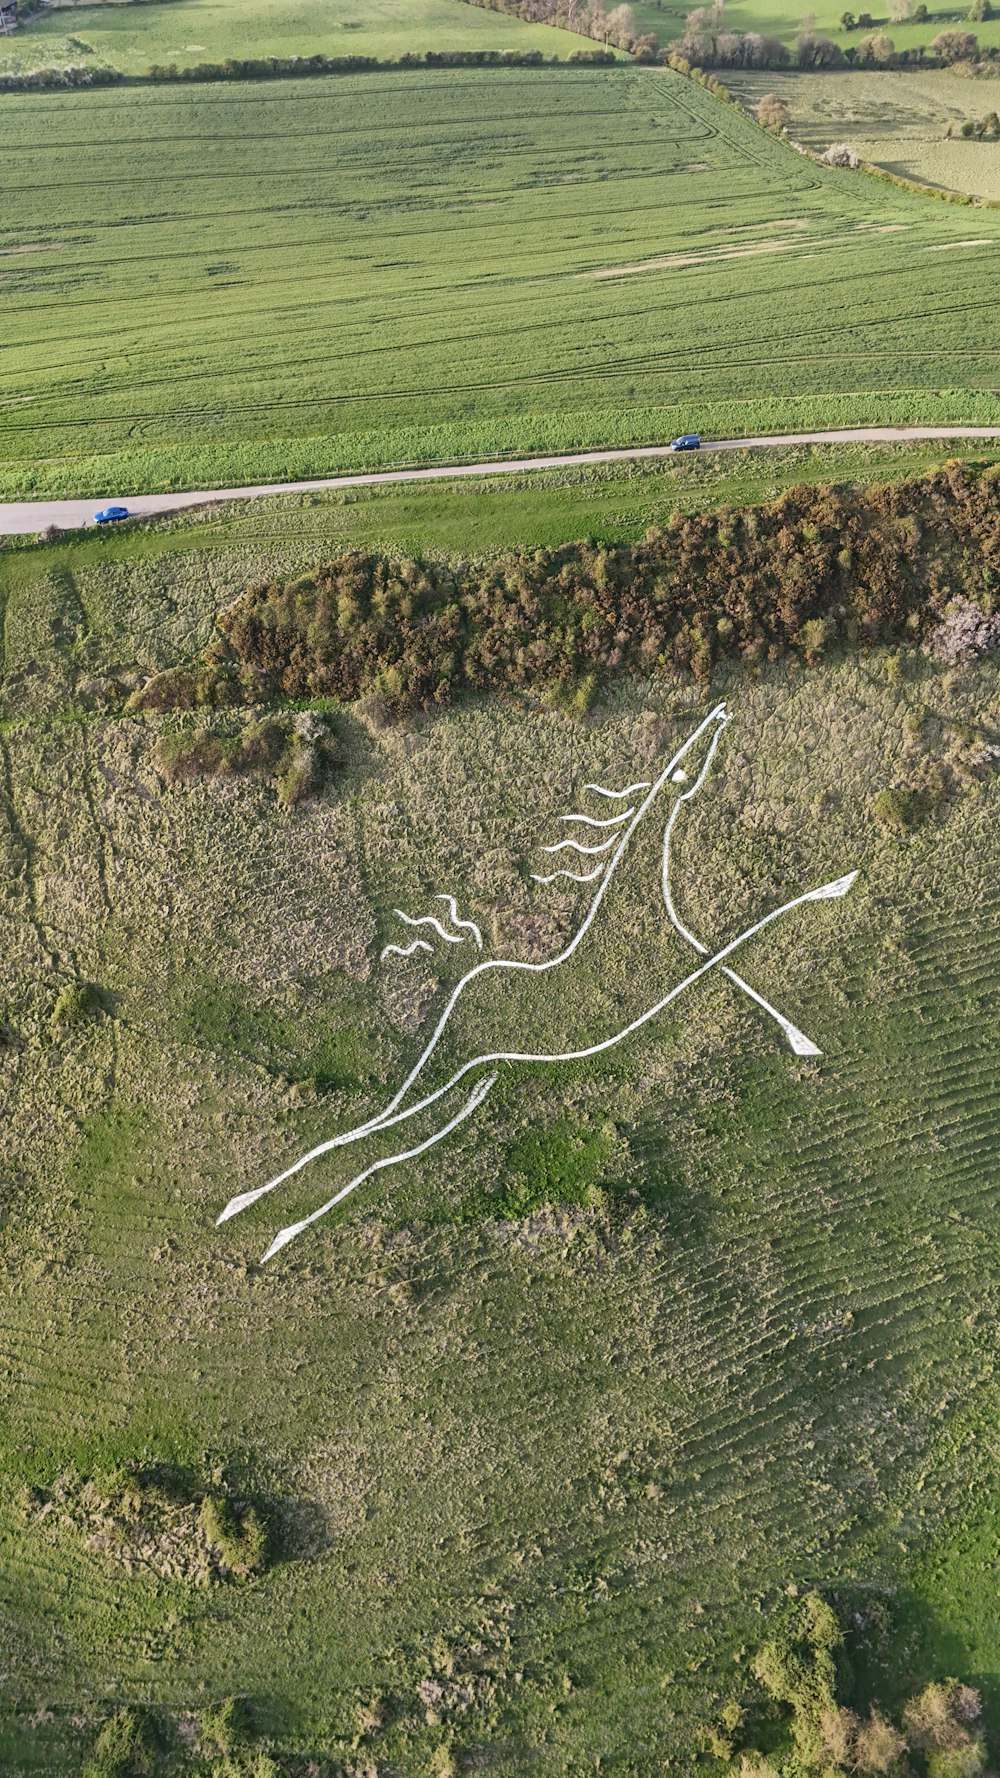 an aerial view of a horse drawn in the grass